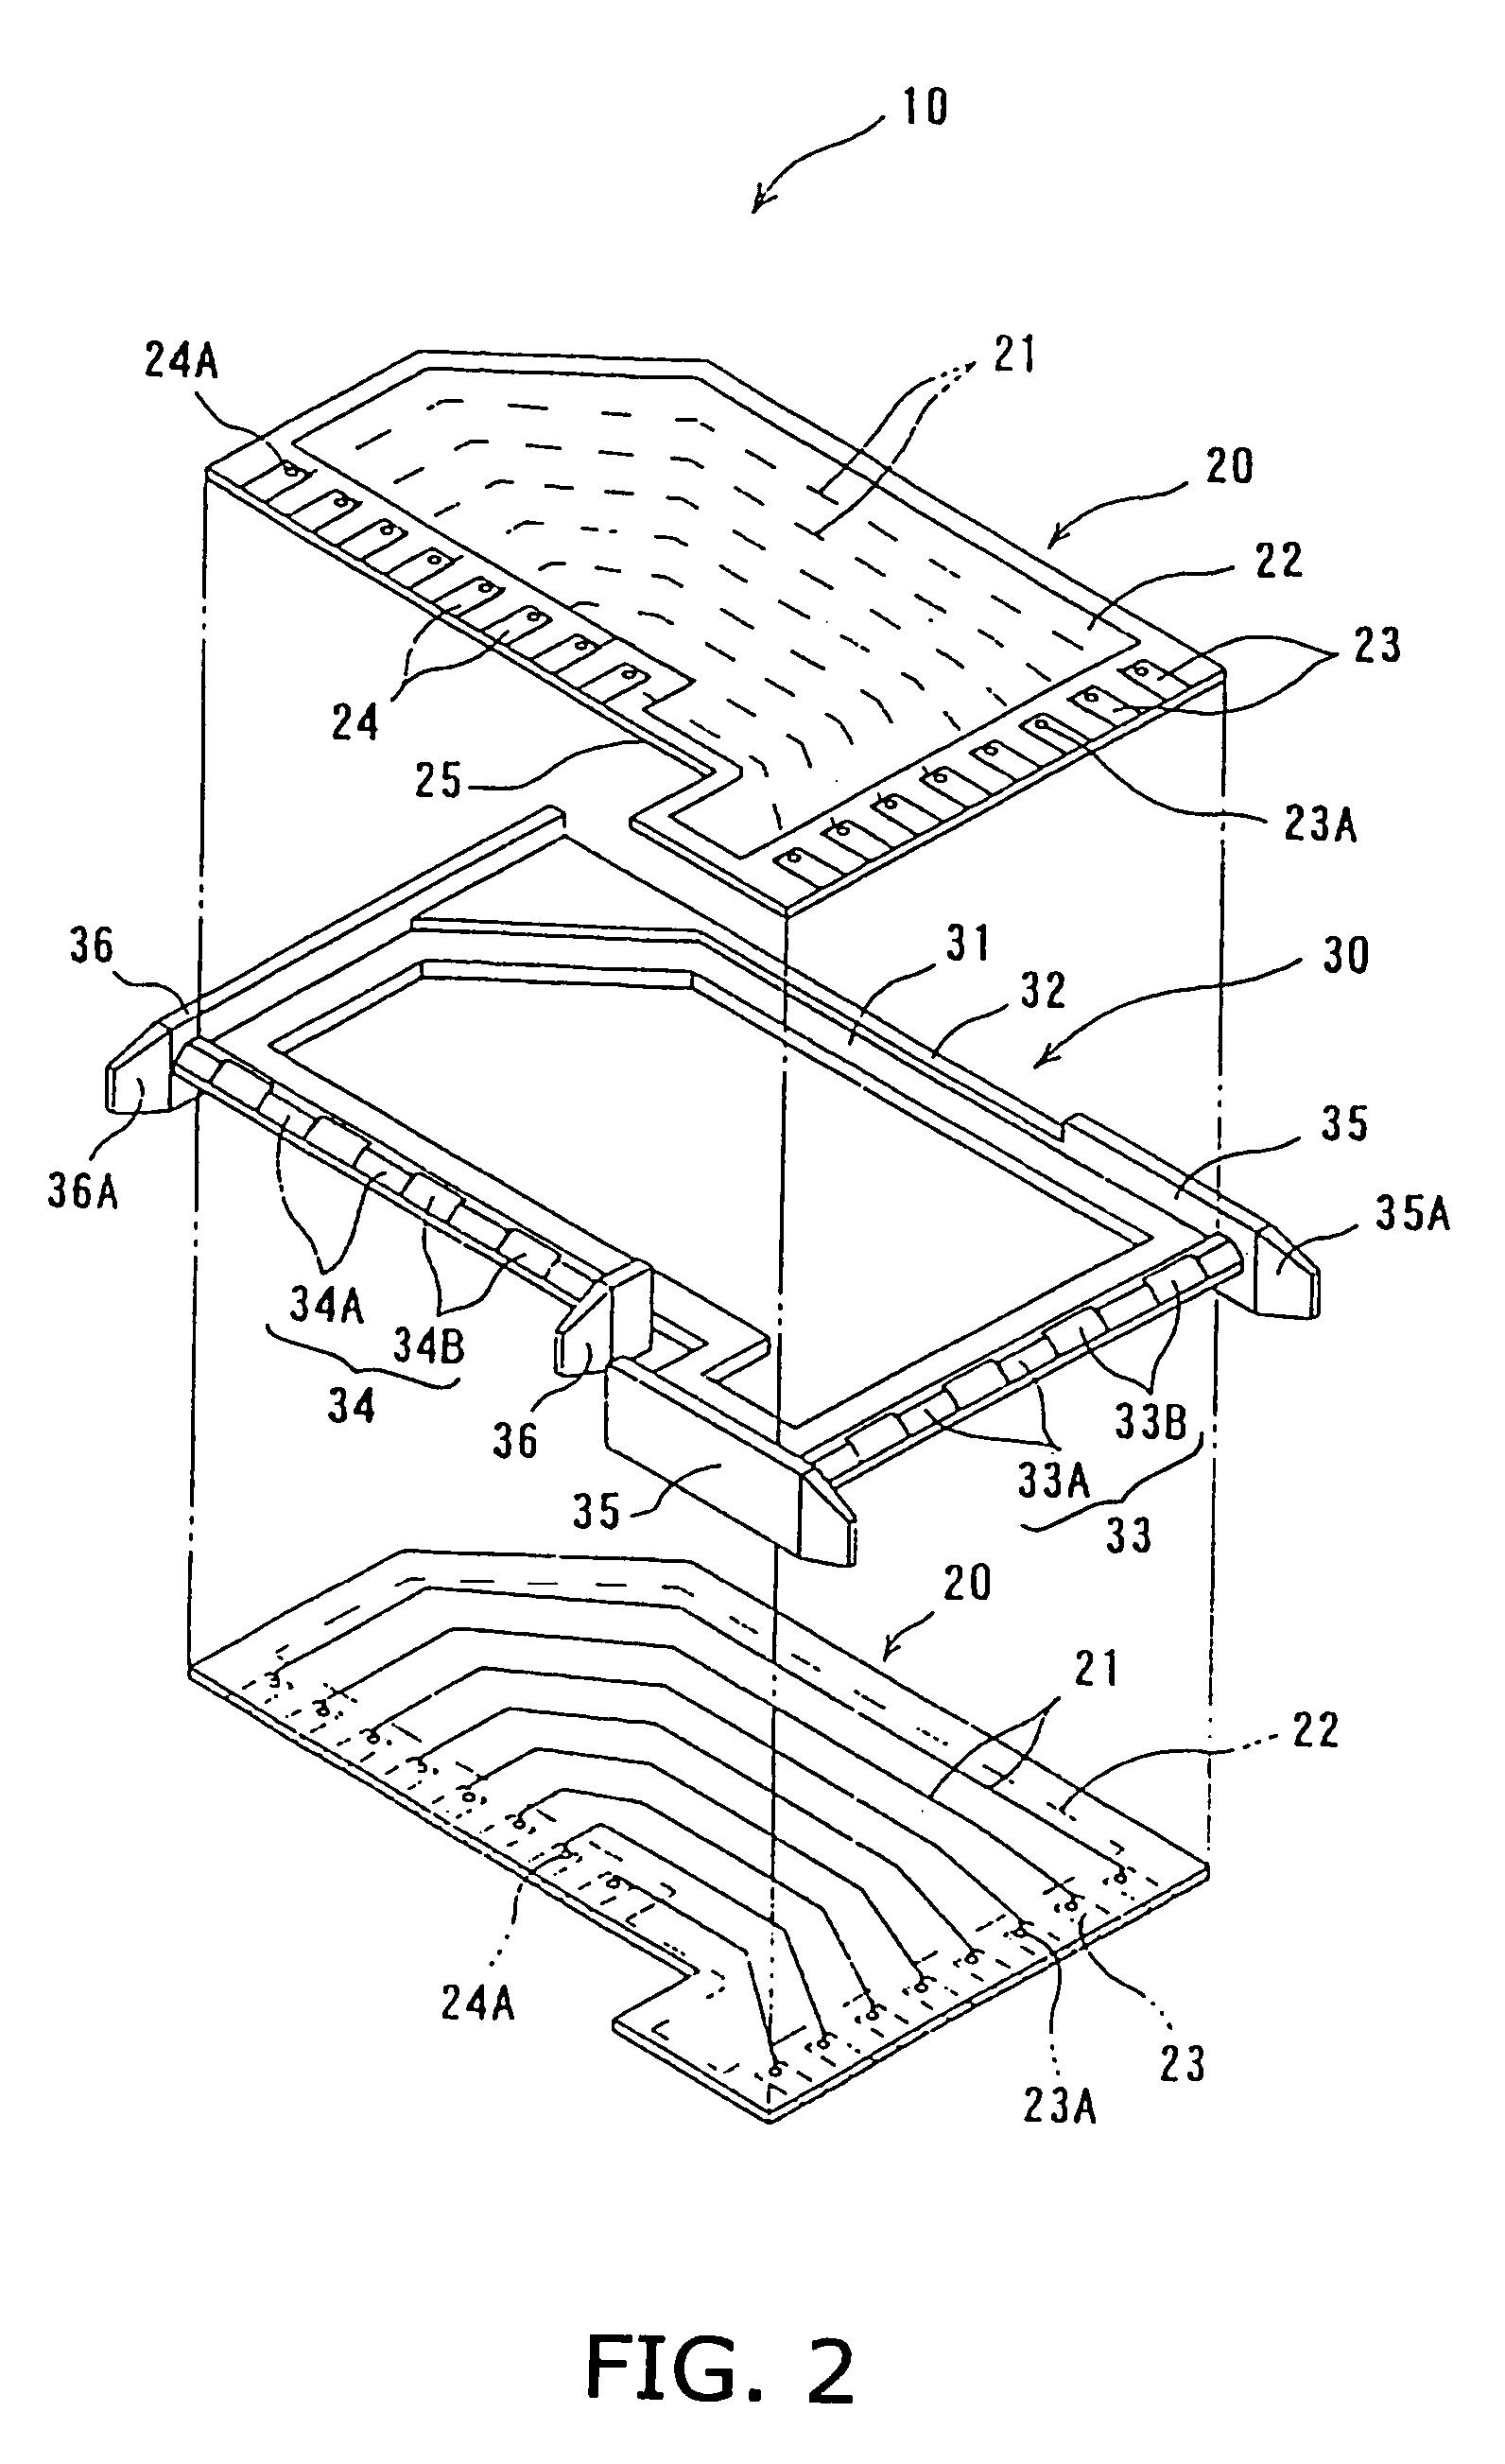 Transmission board and connector assembly made by a combination of a connector and the transmission board